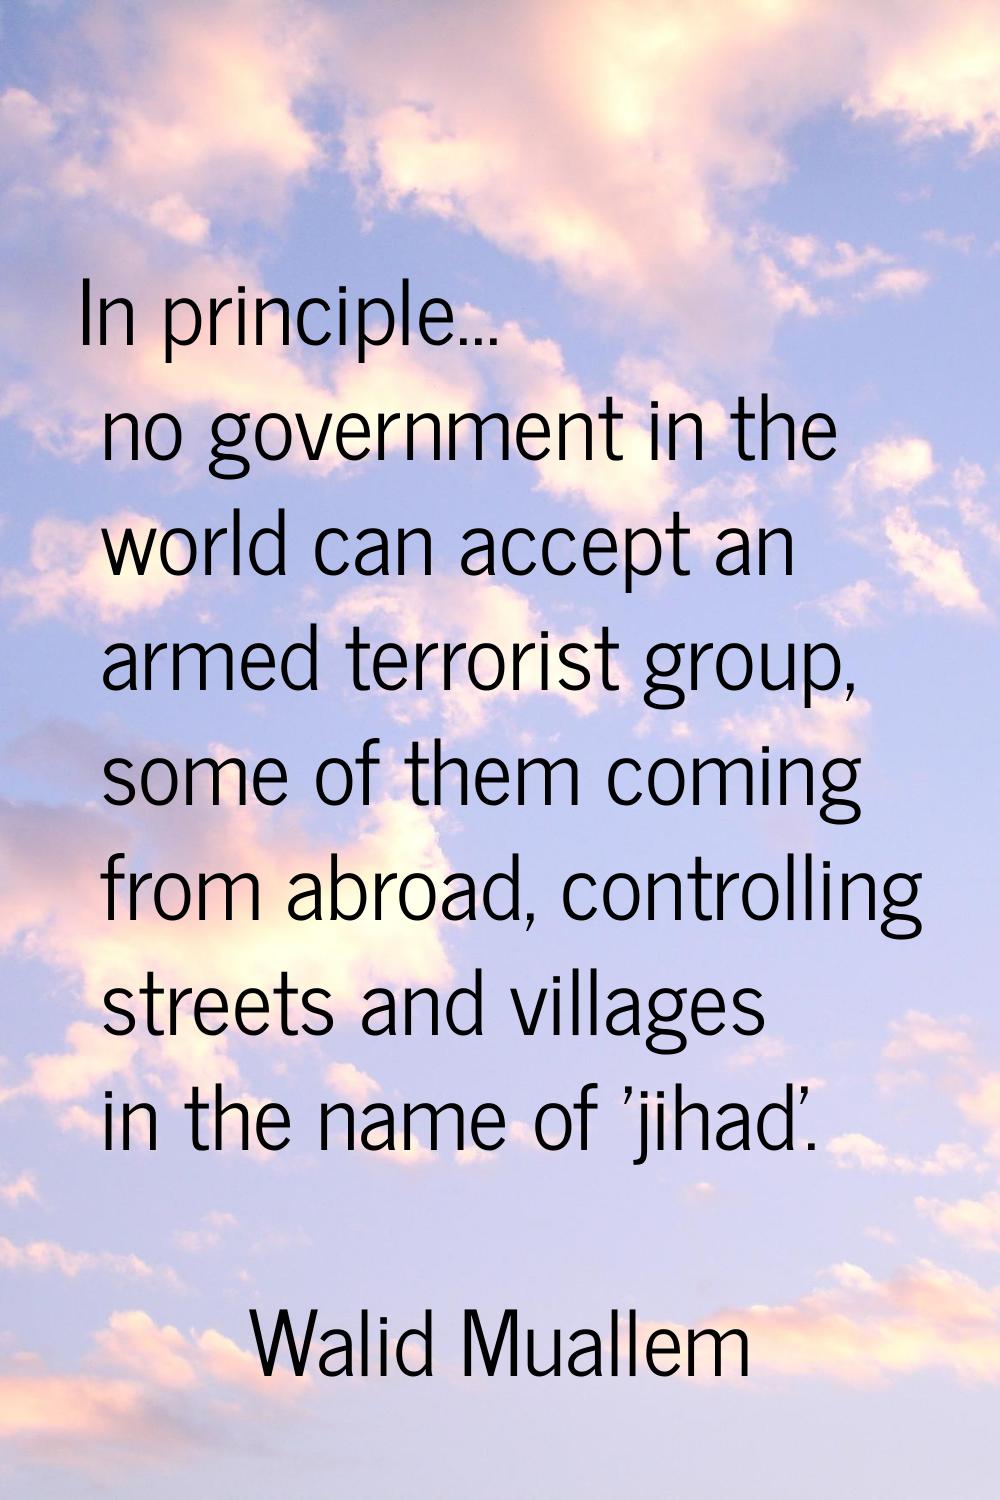 In principle... no government in the world can accept an armed terrorist group, some of them coming